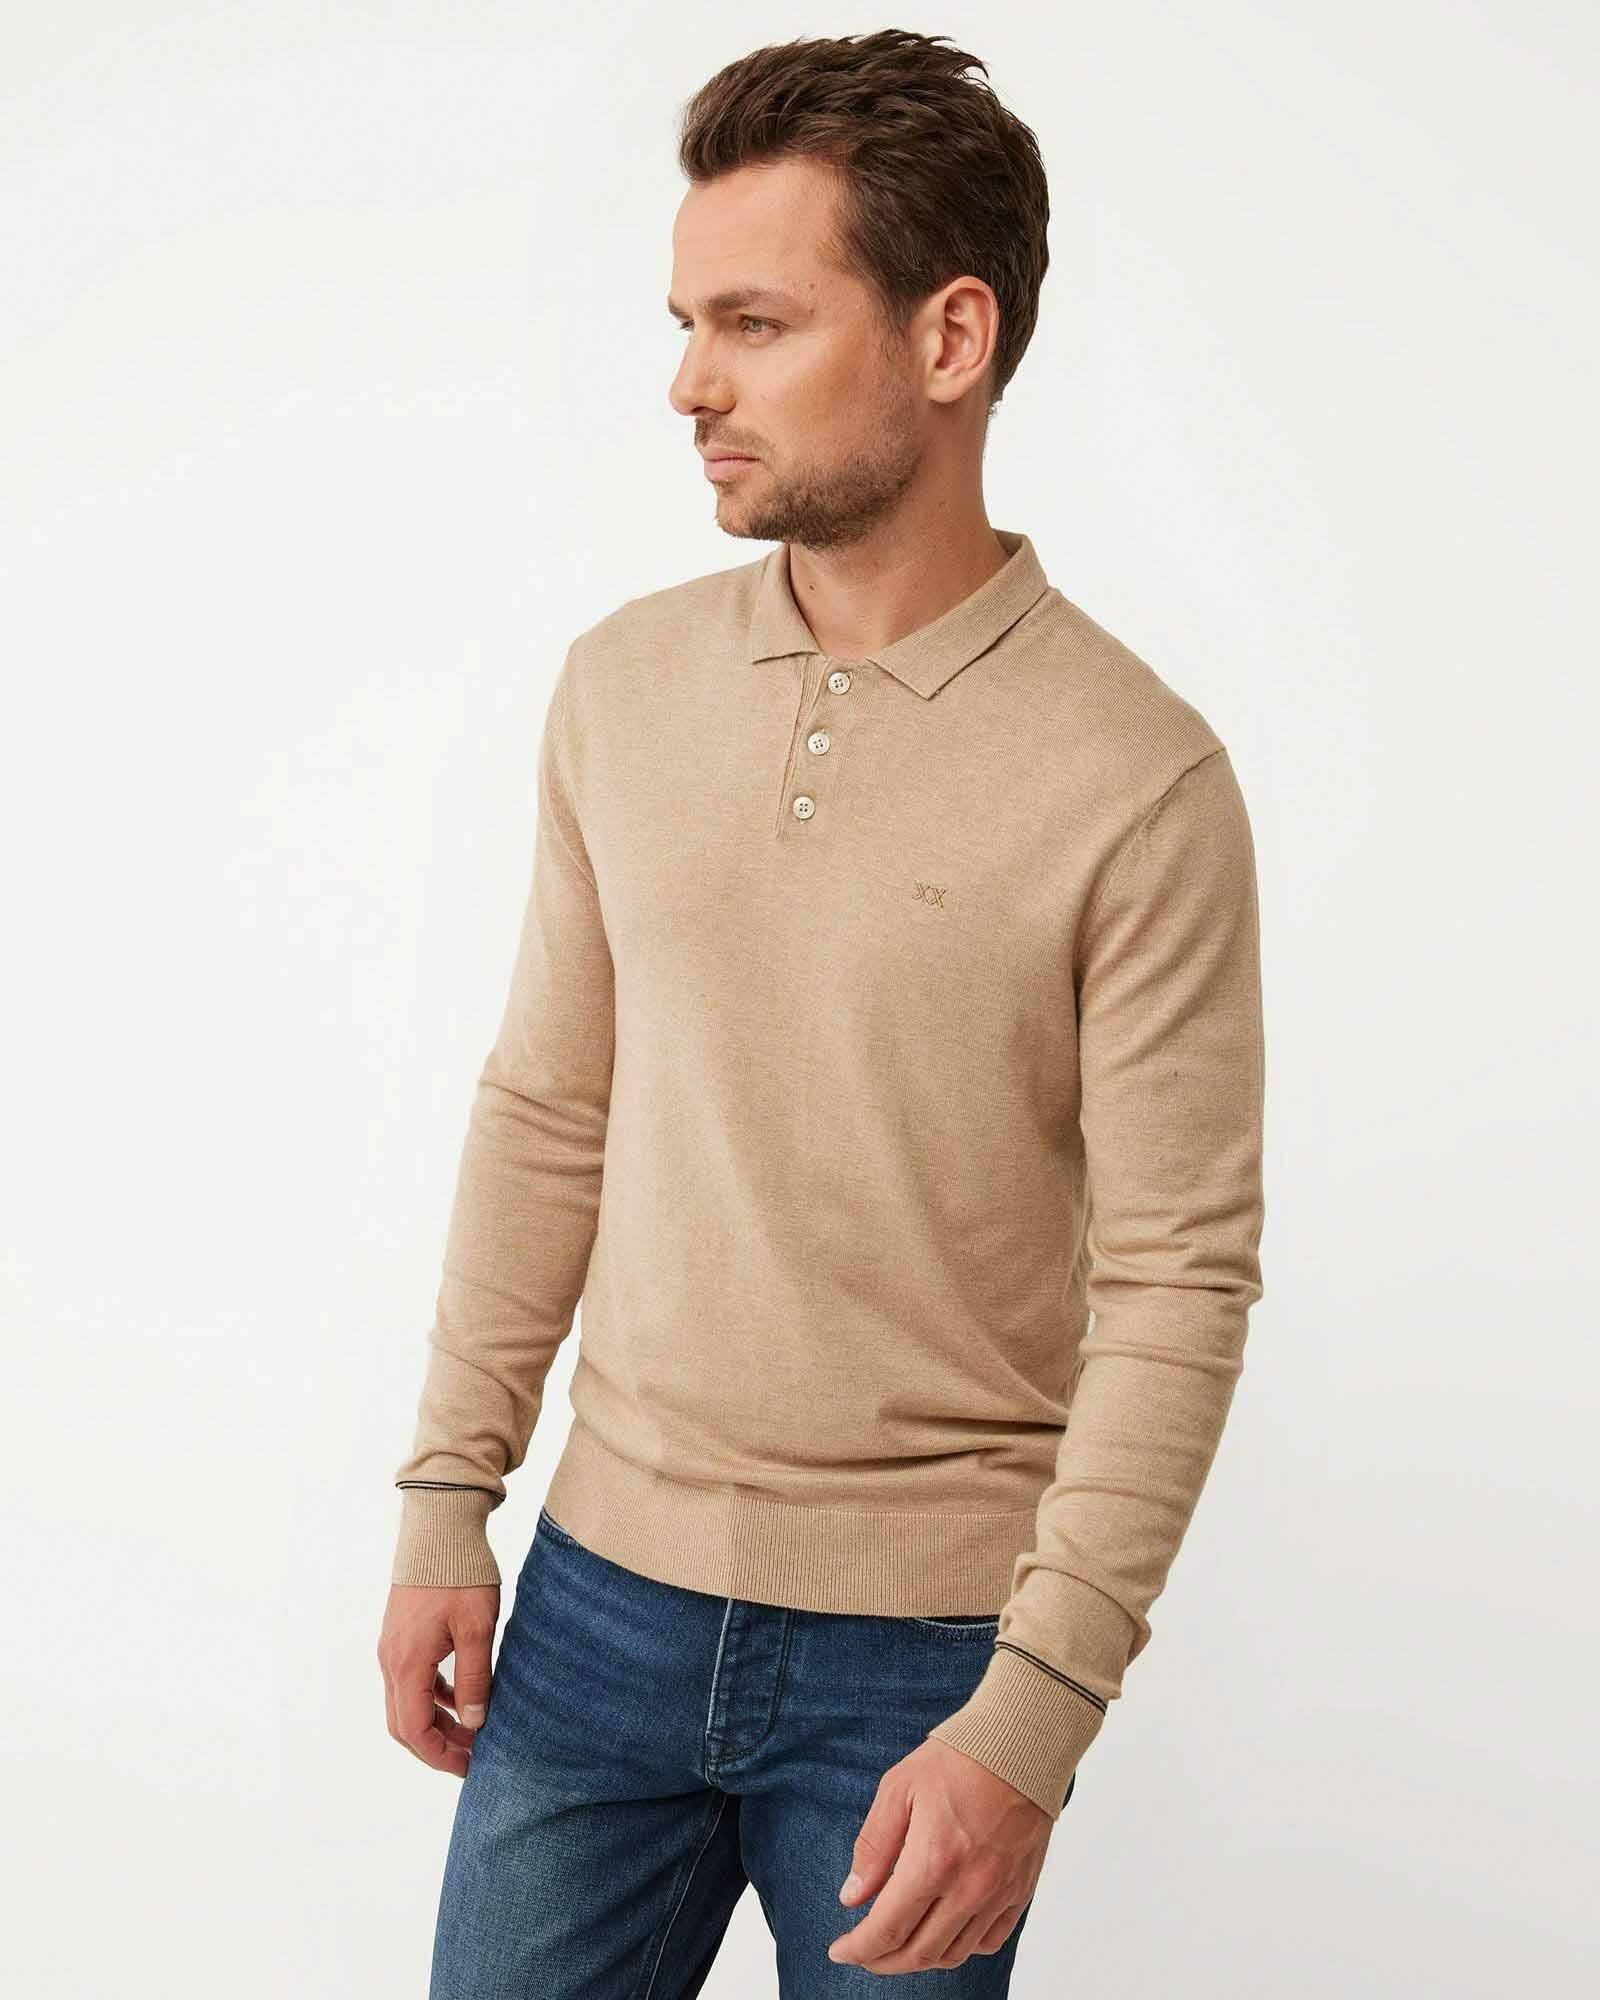 Mexx TYLOR Fine Knit Polo Mannen - Sand Melee - Maat S